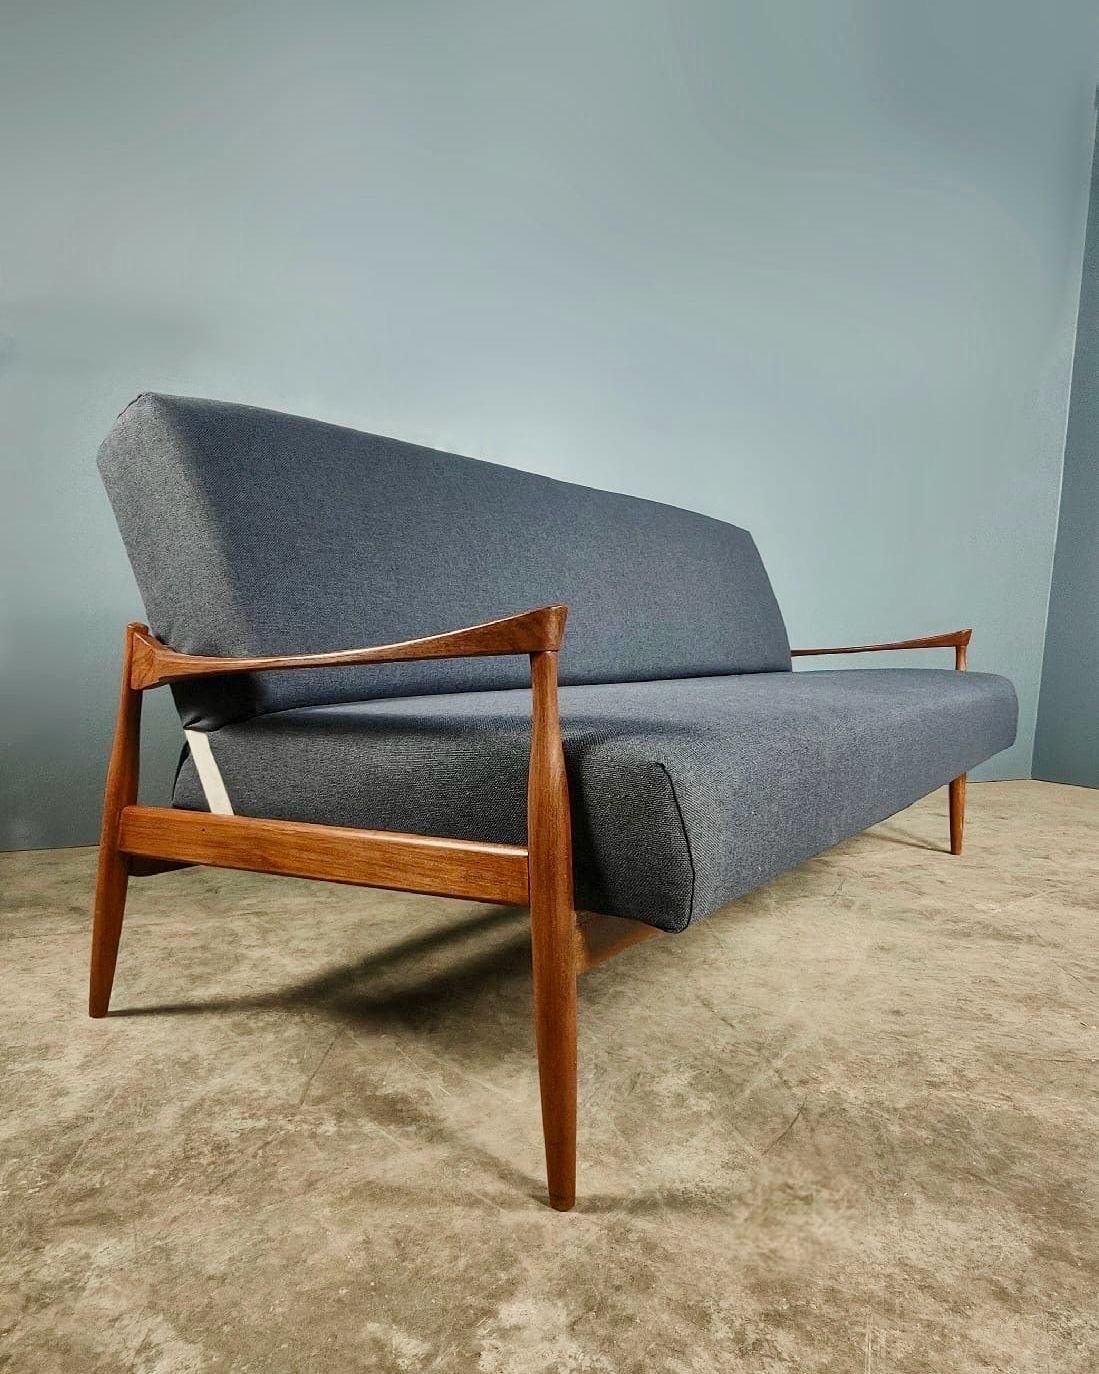 New Stock ✅


Mid Century Kofod Larsen G Plan Danish Range Afromosia 6249 Lounge Chair and 6244 Sofa Bed 


Designed in 1962 by Danish designer Ib Kofod-Larsen for G-Plan's 'Danish Range'. This is a rare opportunity to own a matching pair of mid